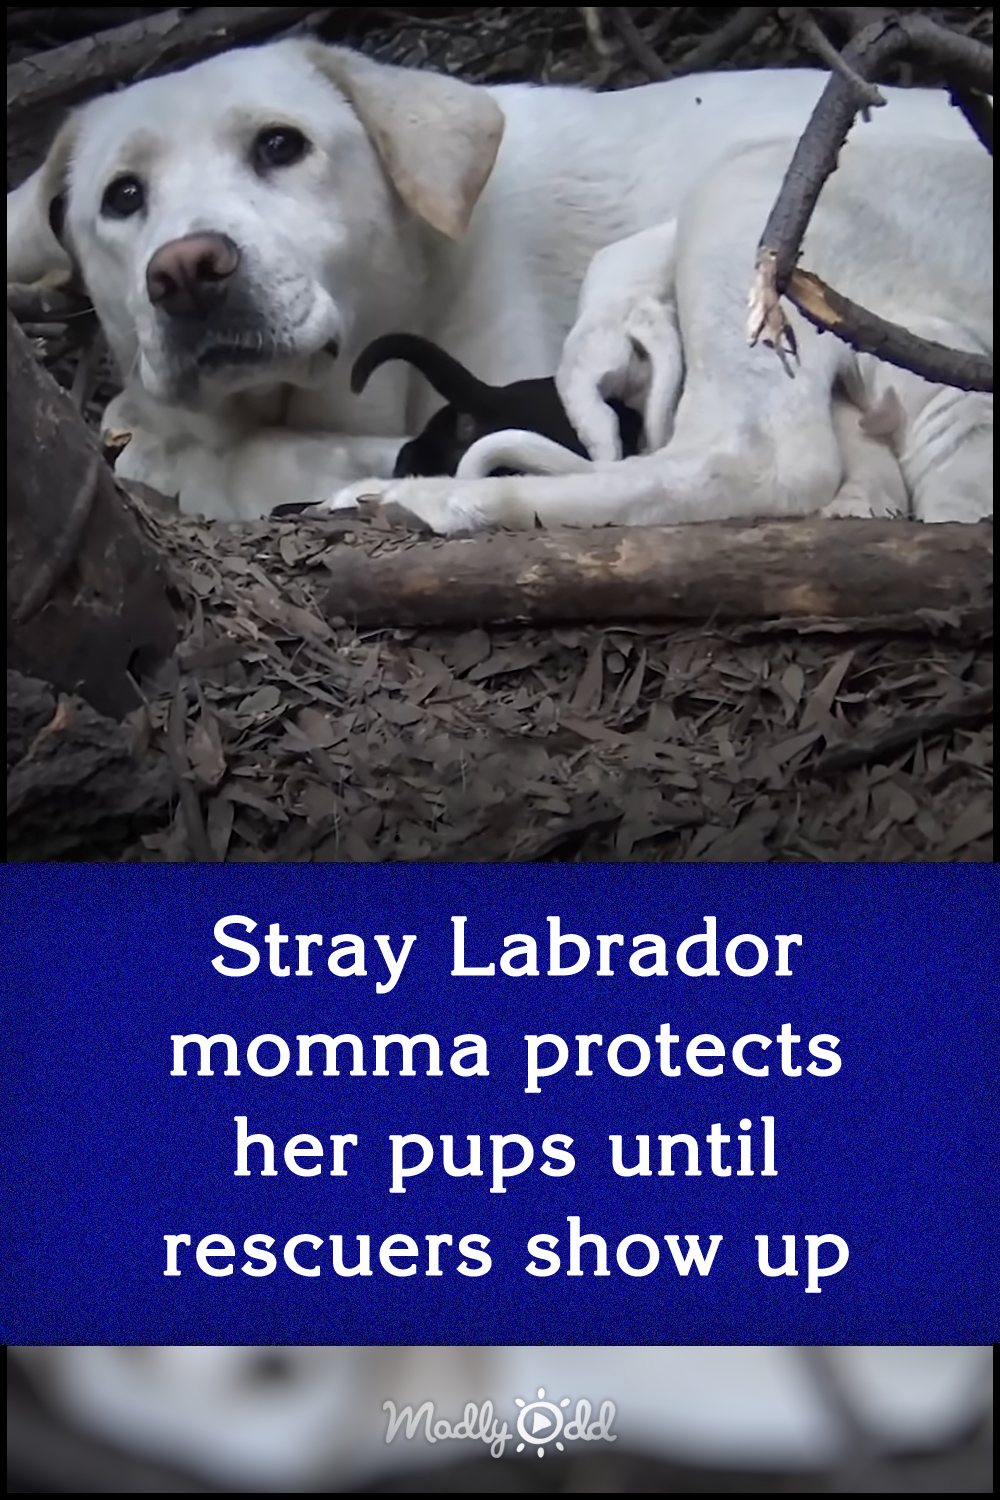 Stray Labrador momma protects her pups until rescuers show up